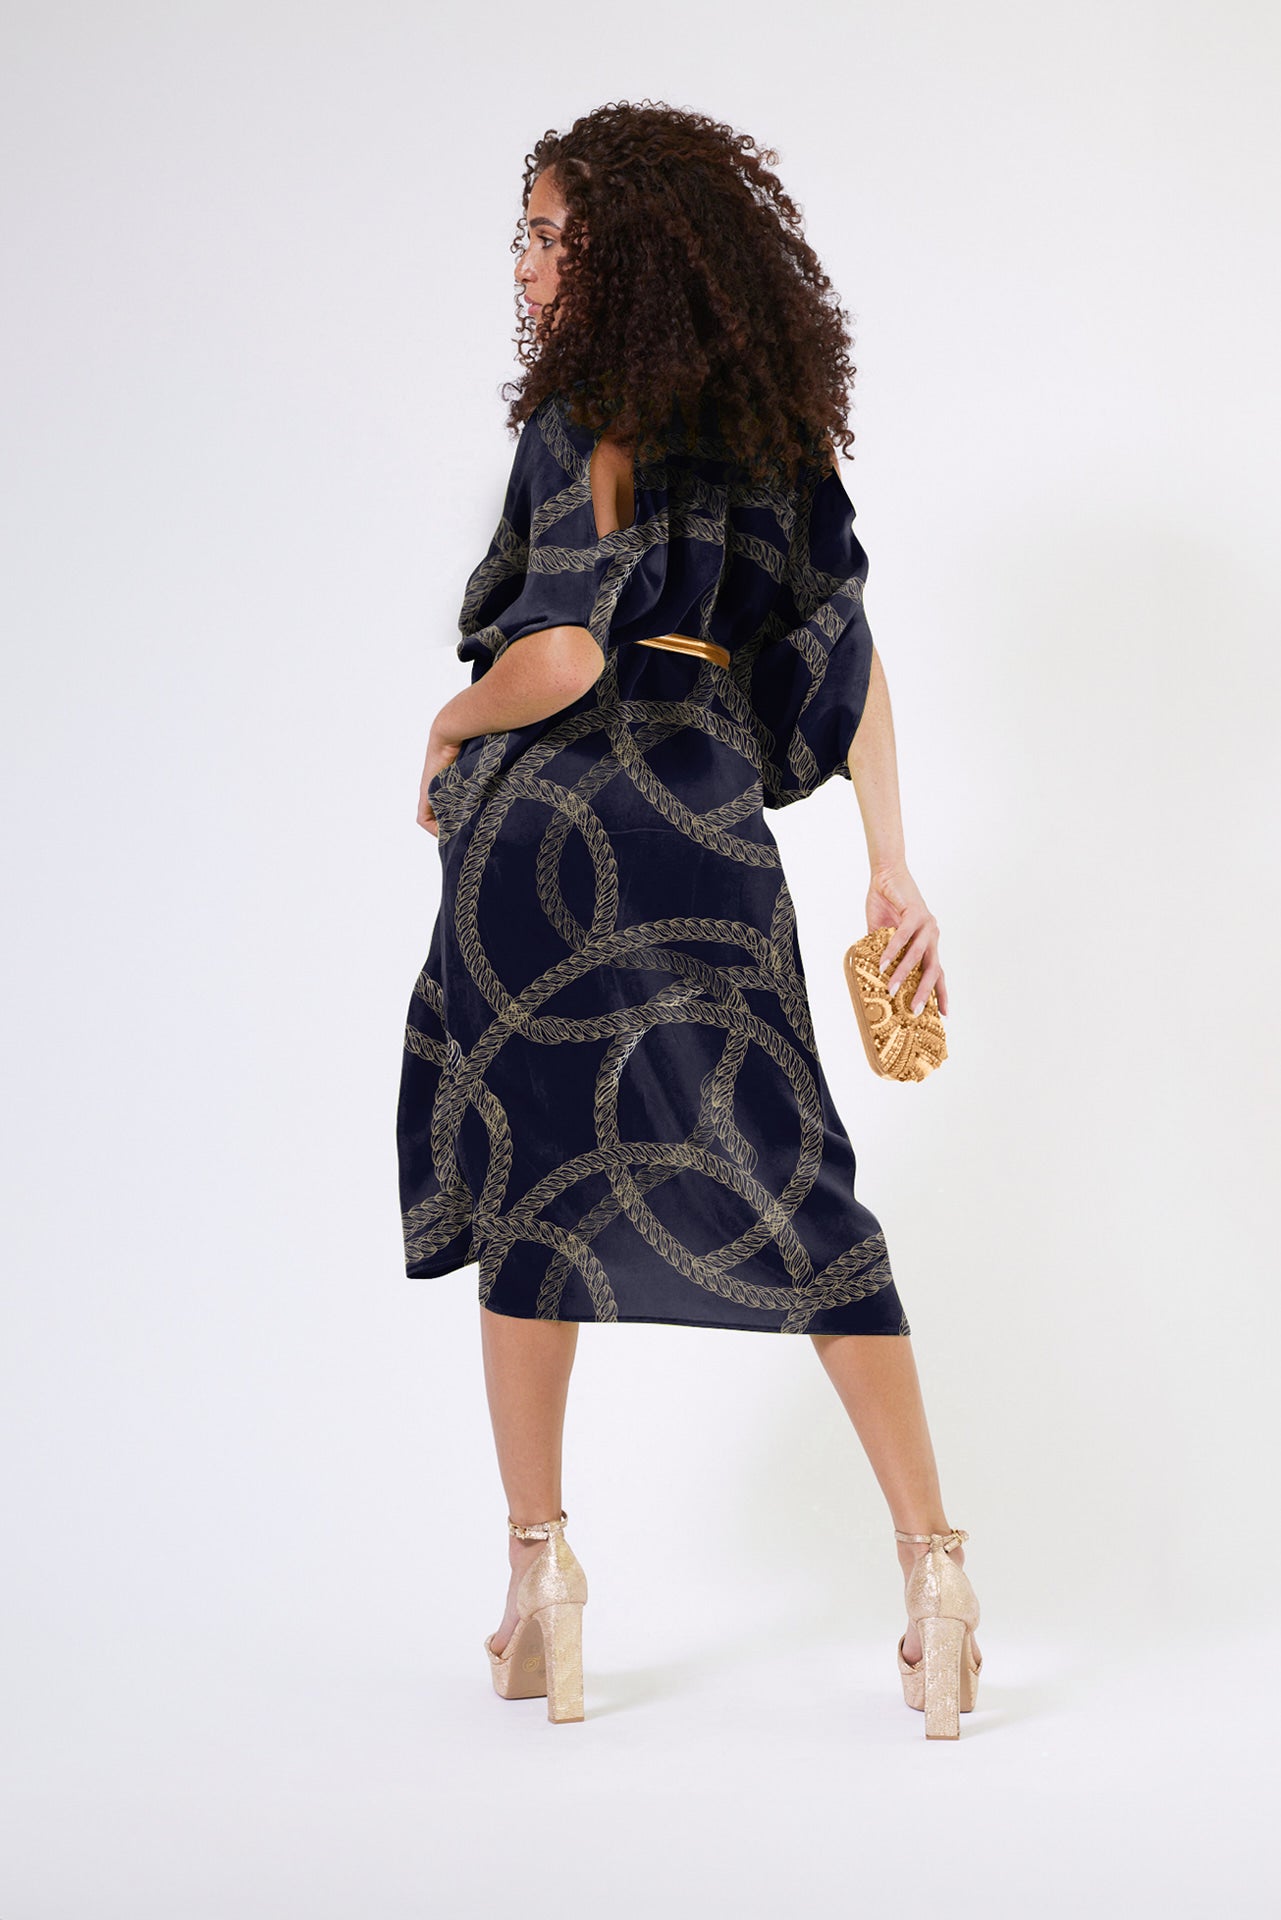 back view of woman modelling gold and black chain printed kaftan duster with front zipper made from recycled materials